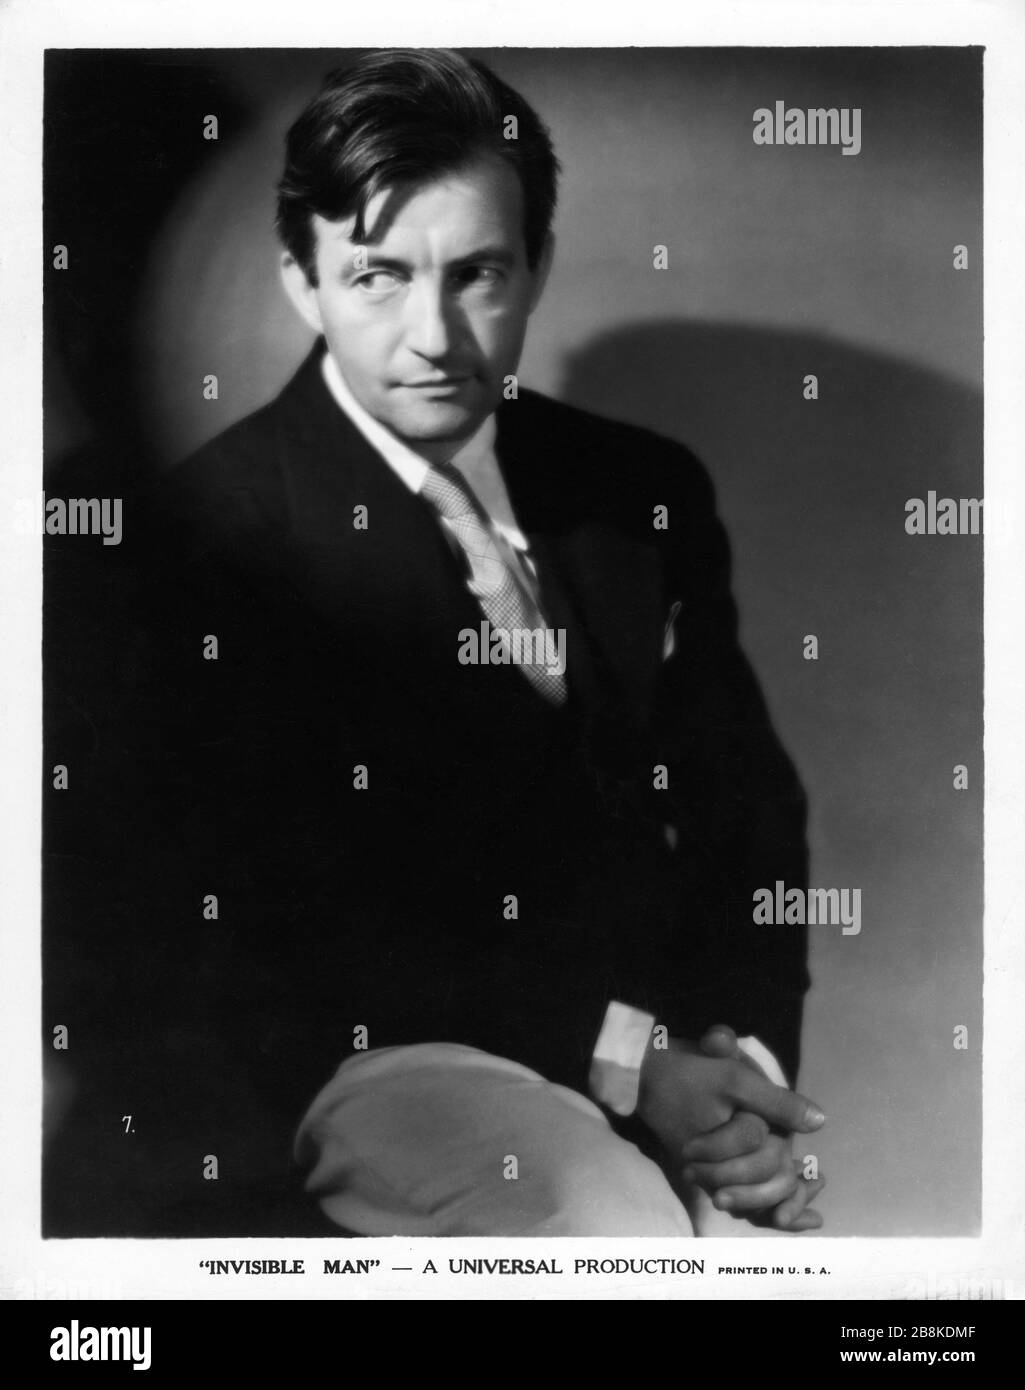 CLAUDE RAINS Publicity Portrait by Roman FREULICH for his appearance as THE INVISIBLE MAN 1933 director JAMES WHALE novel H. G. Wells screenplay R. C. Sherriff Universal Pictures Stock Photo